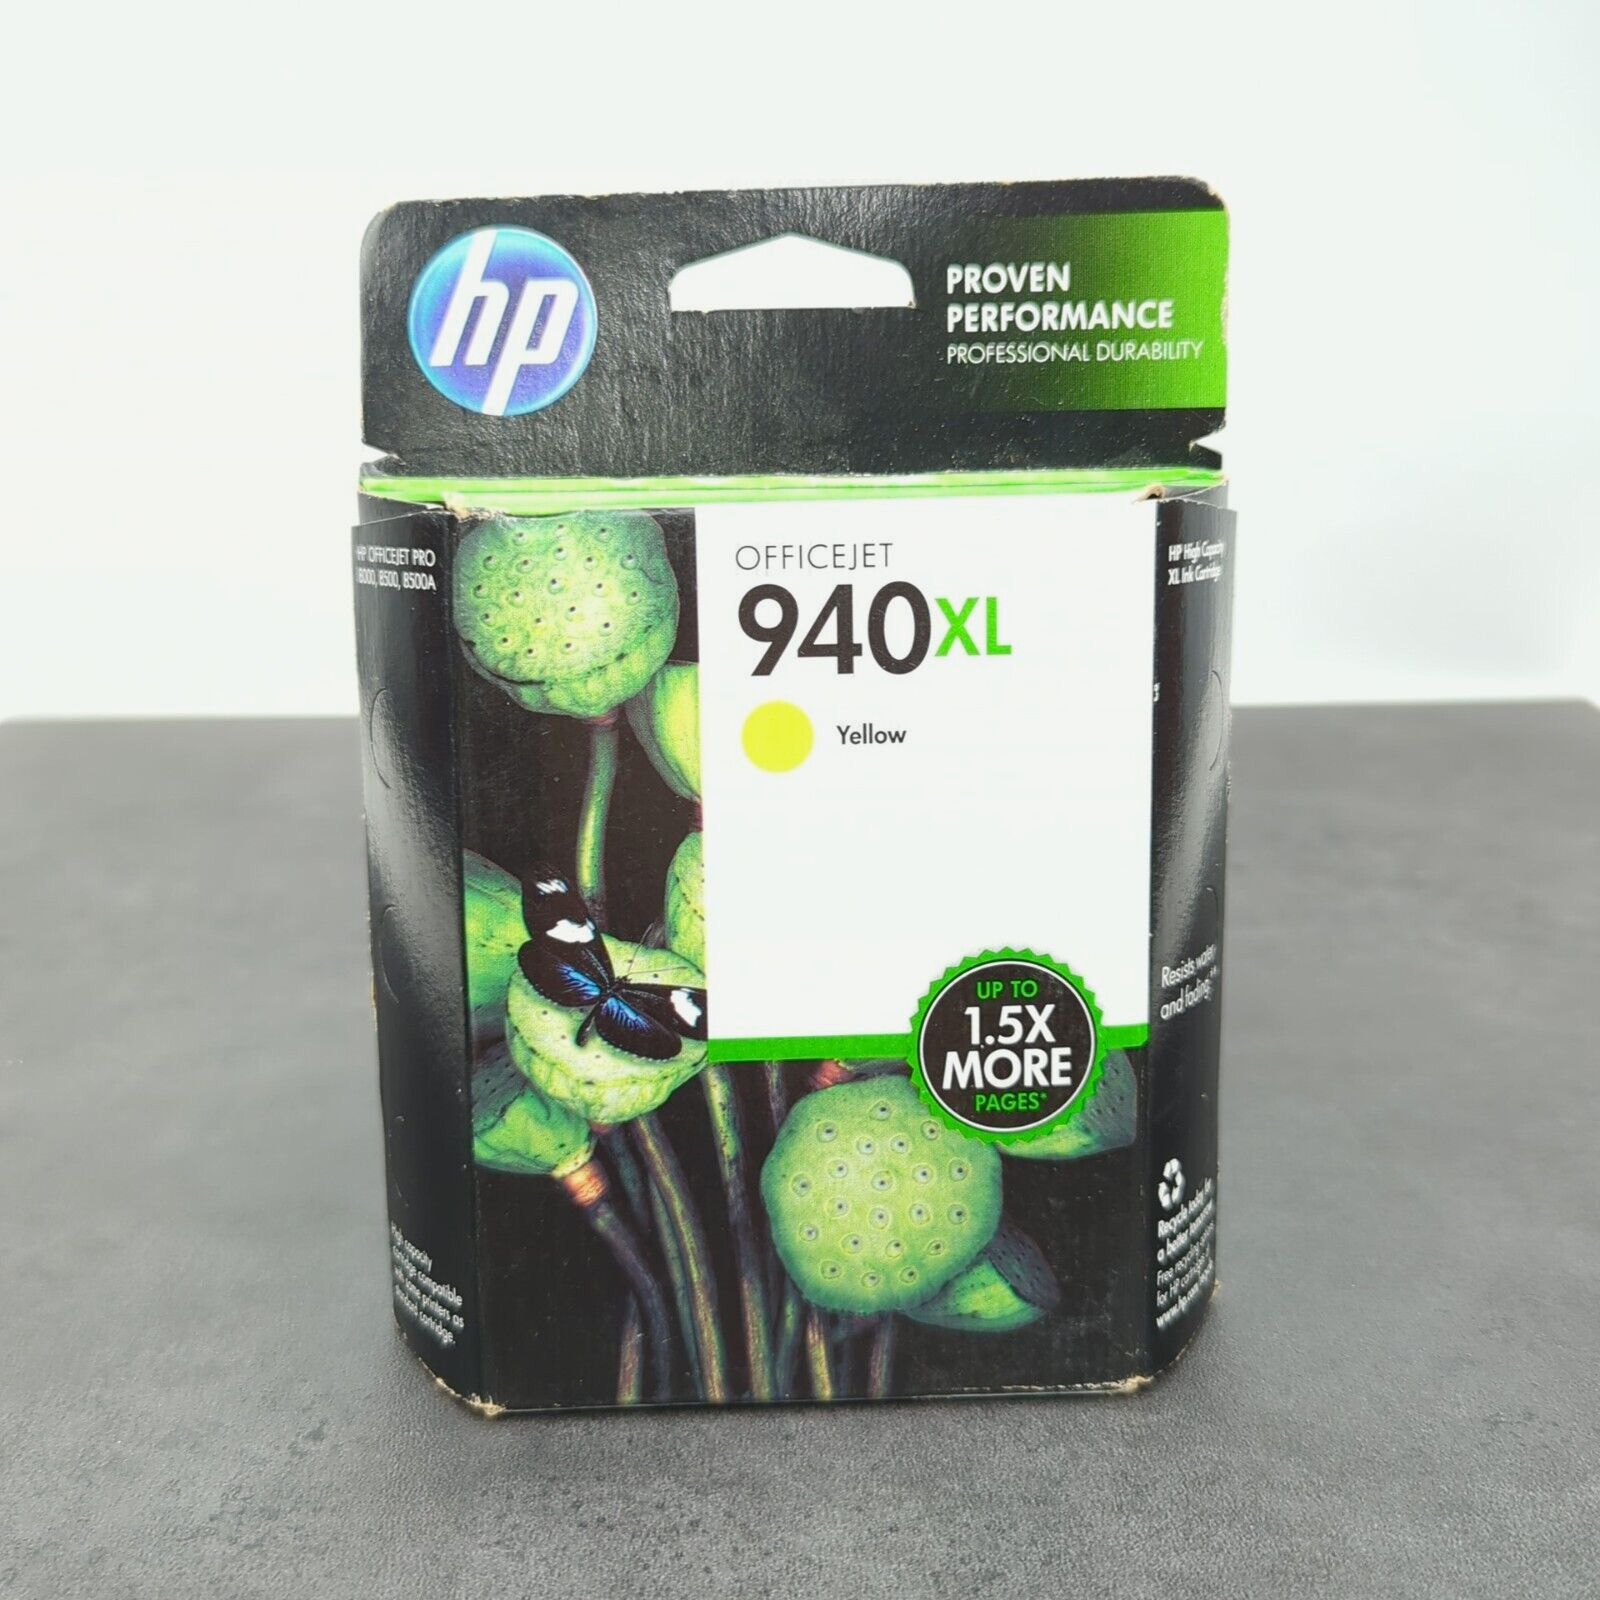 Genuine HP Office Jet 940 XL High Yield Yellow Ink Cartridge Exp 4/15 NEW SEALED